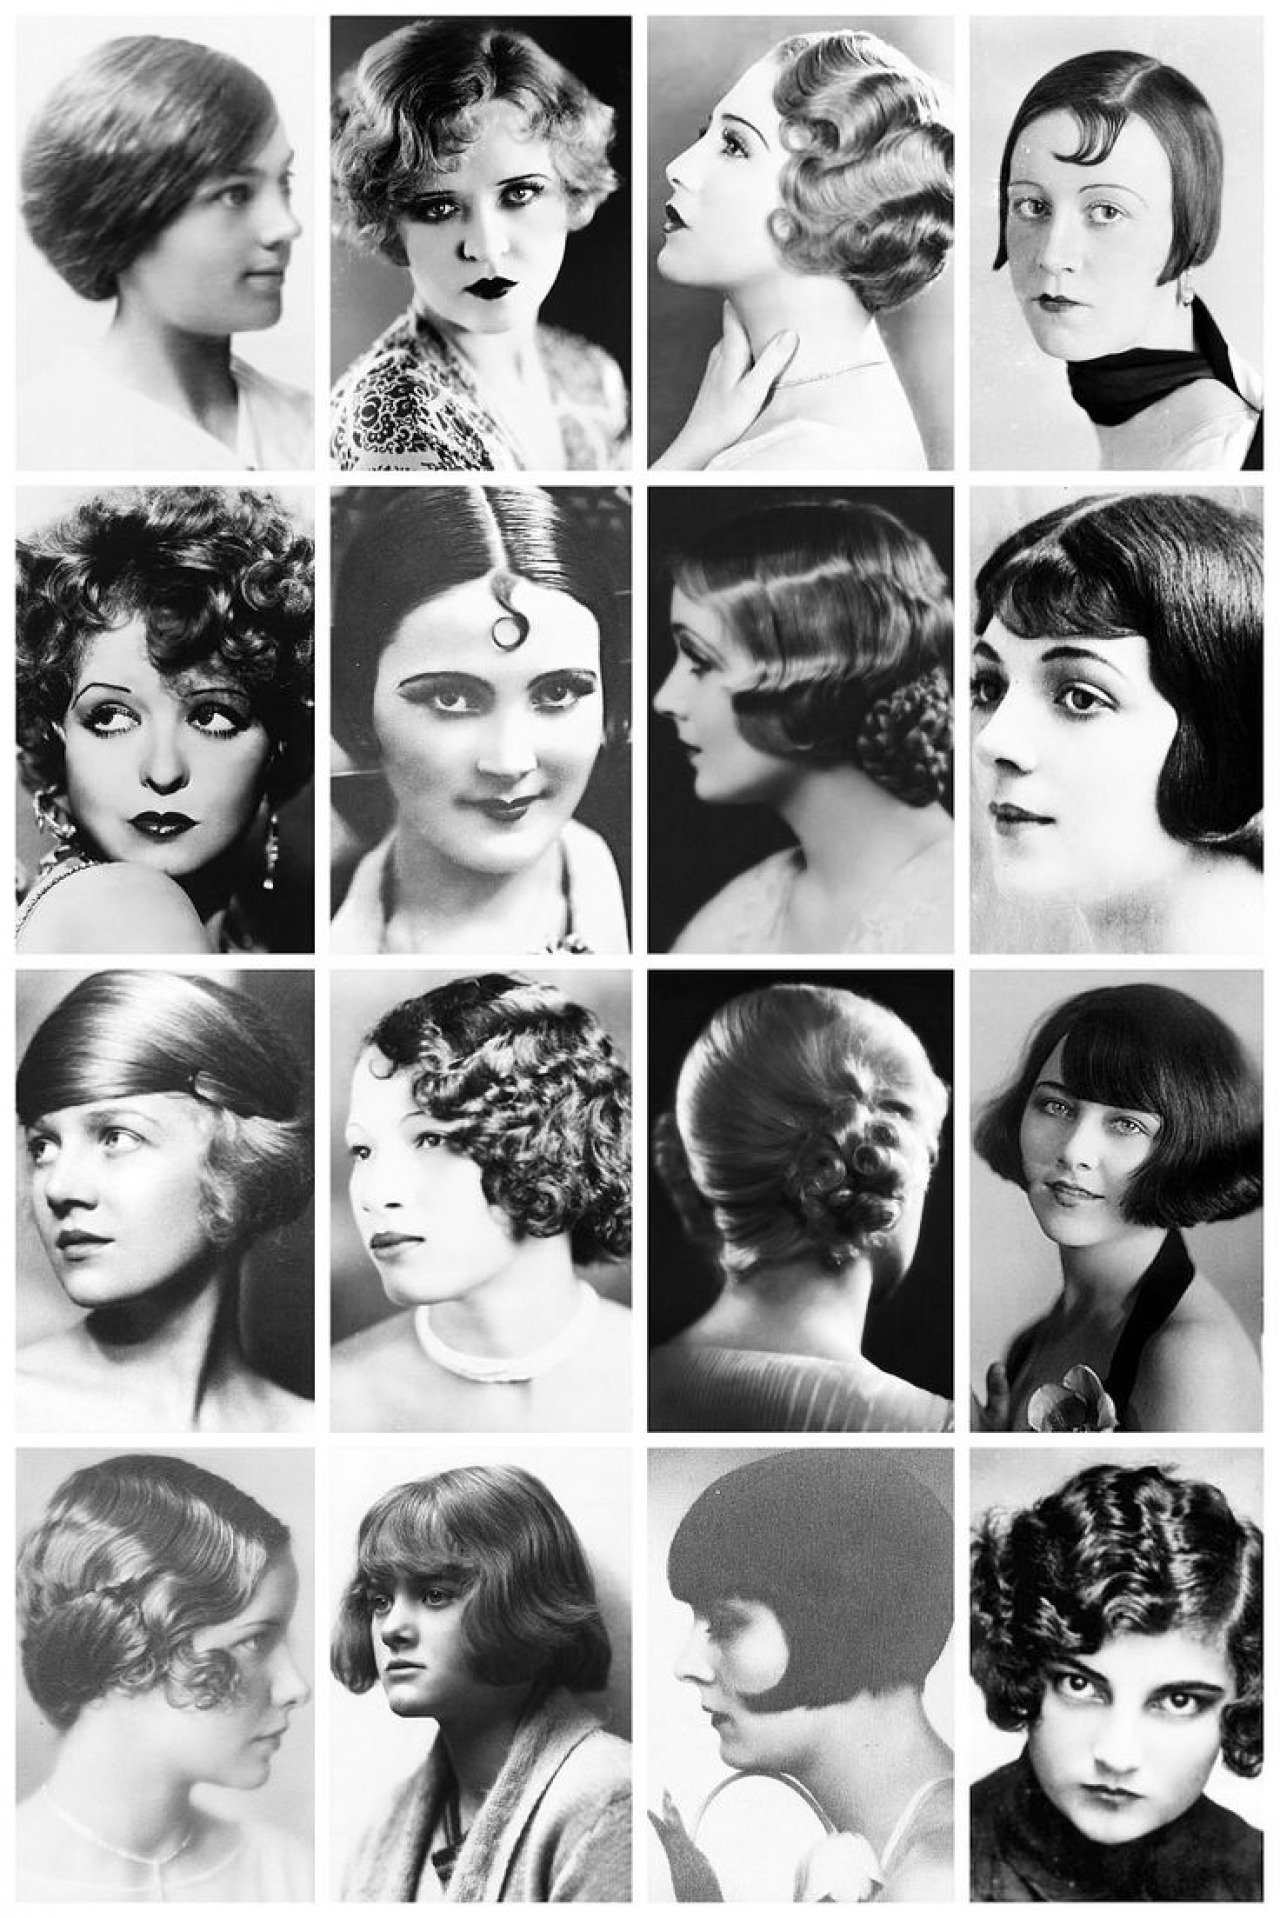 Hairstyles: 1920s Women | Fashion and Decor: A Cultural History